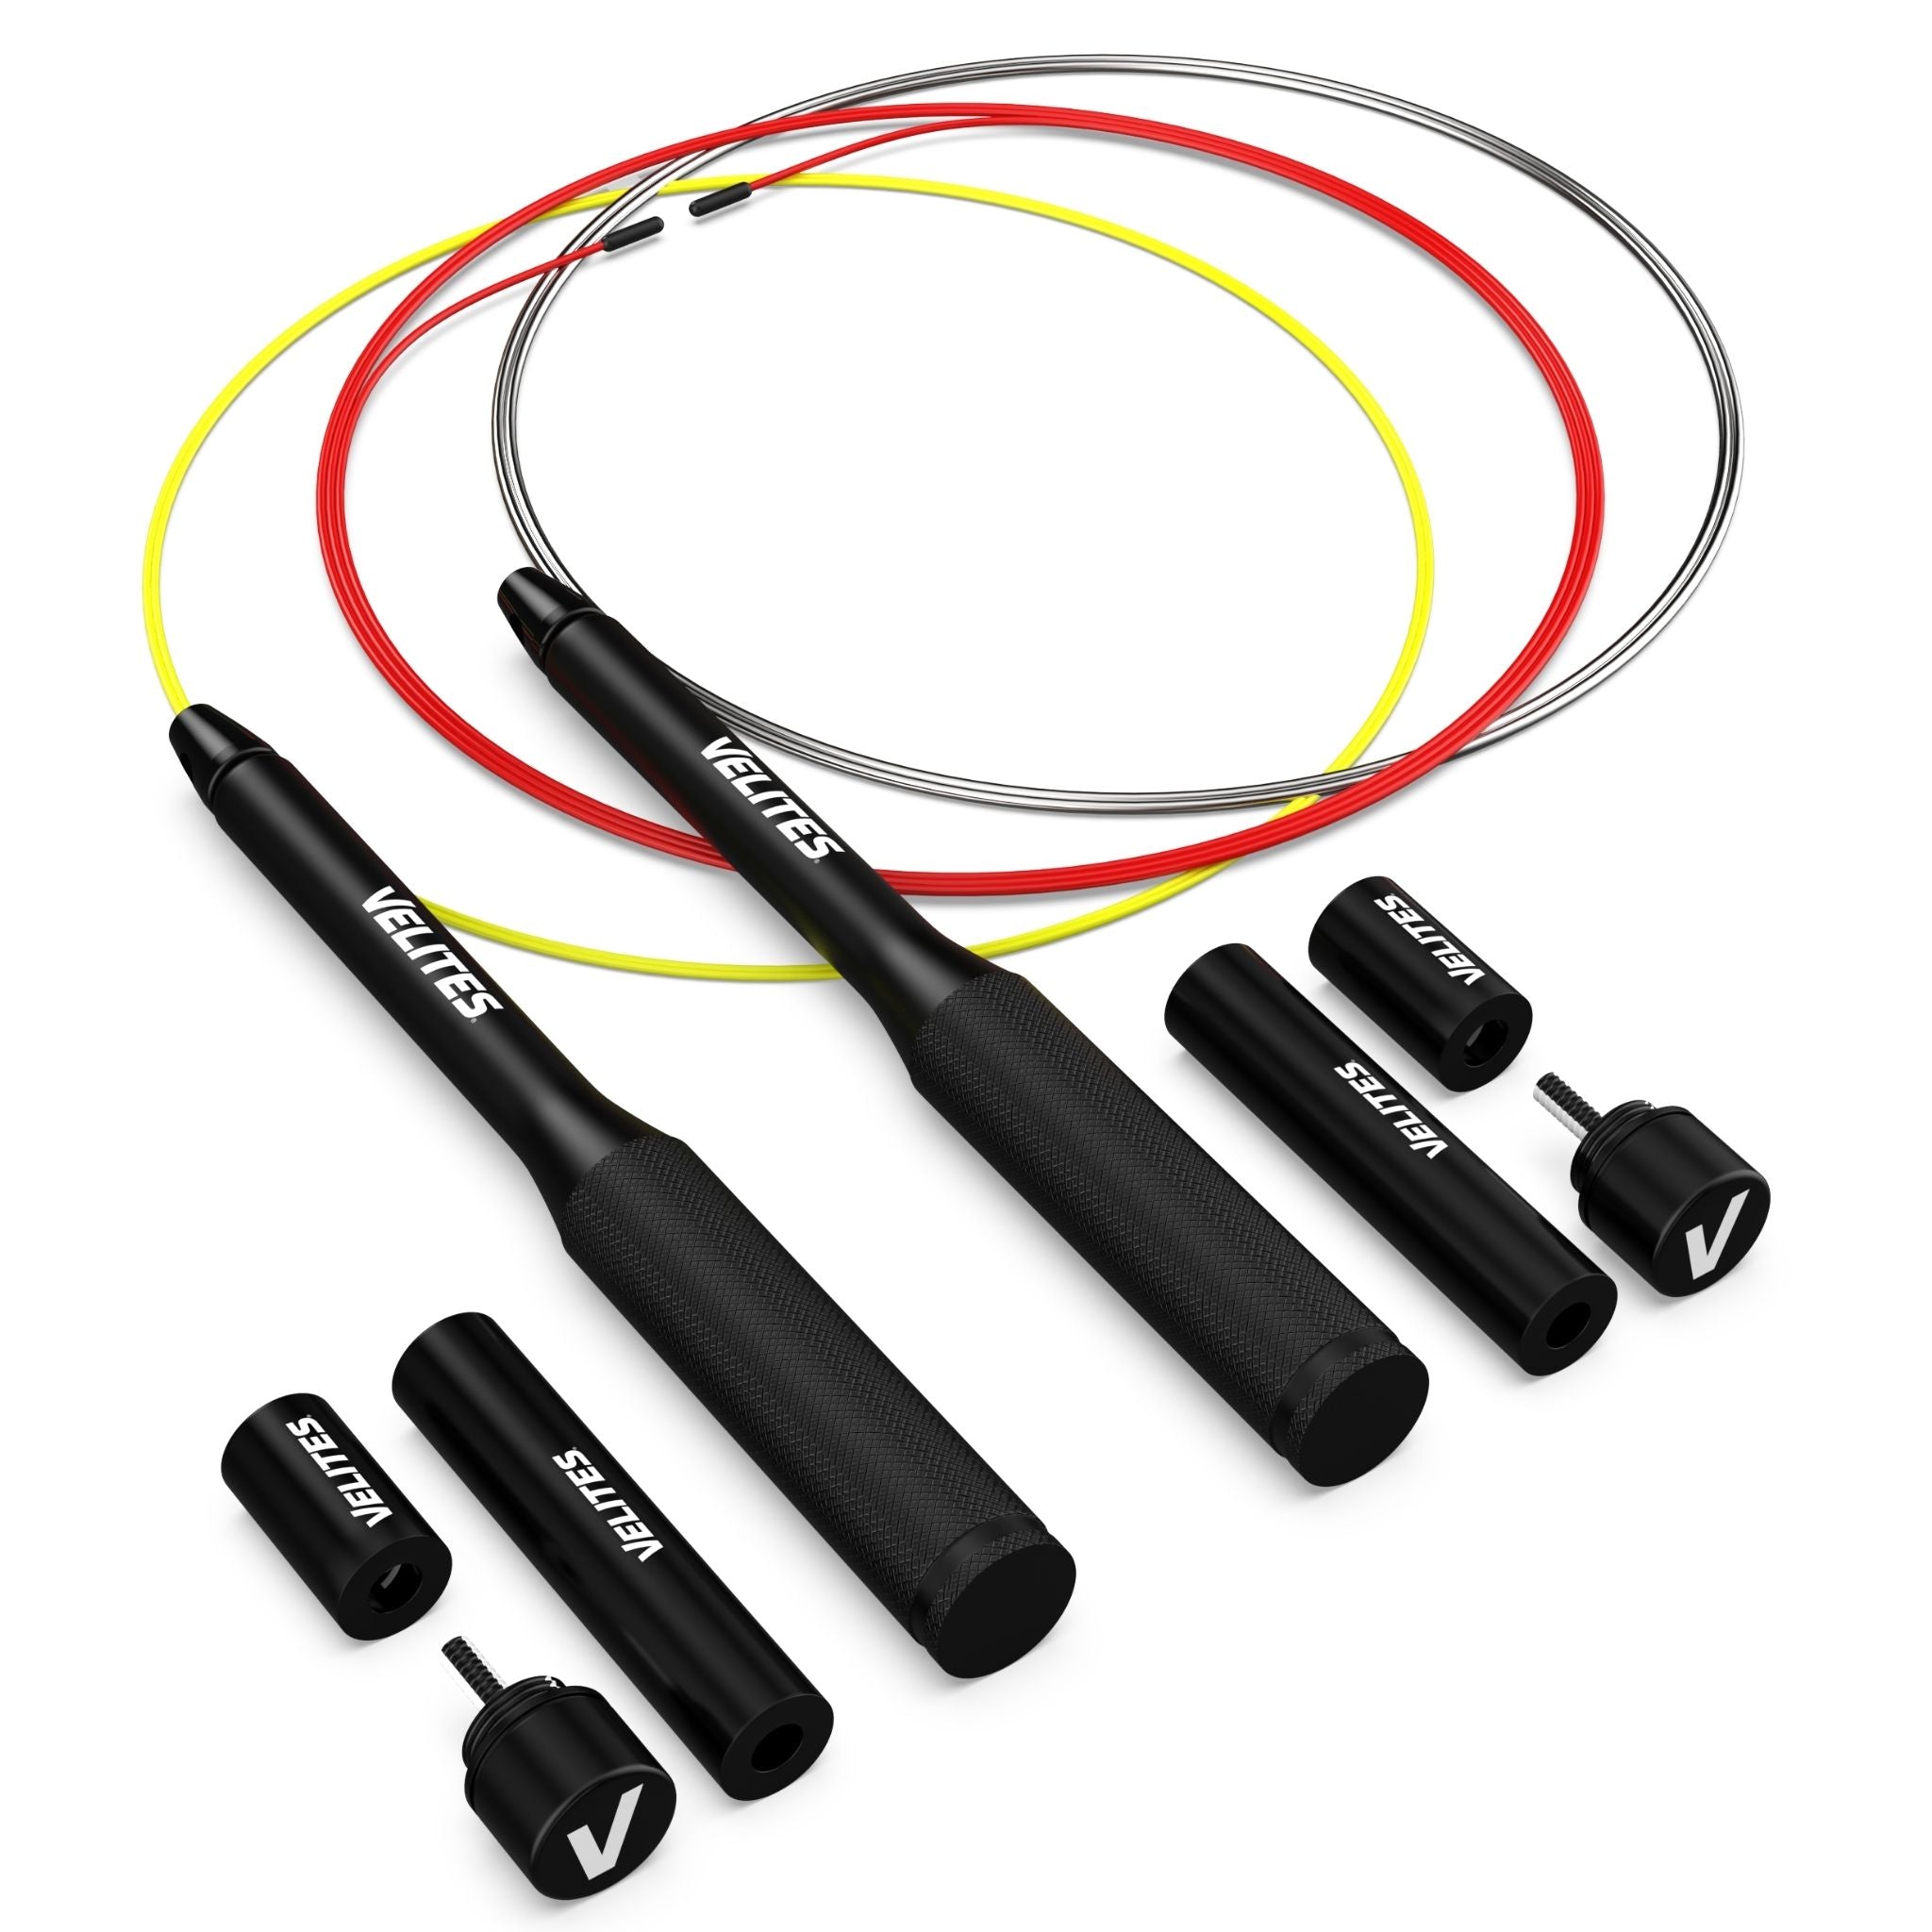 Pack comba Earth 2.0 + Lastres + Cables